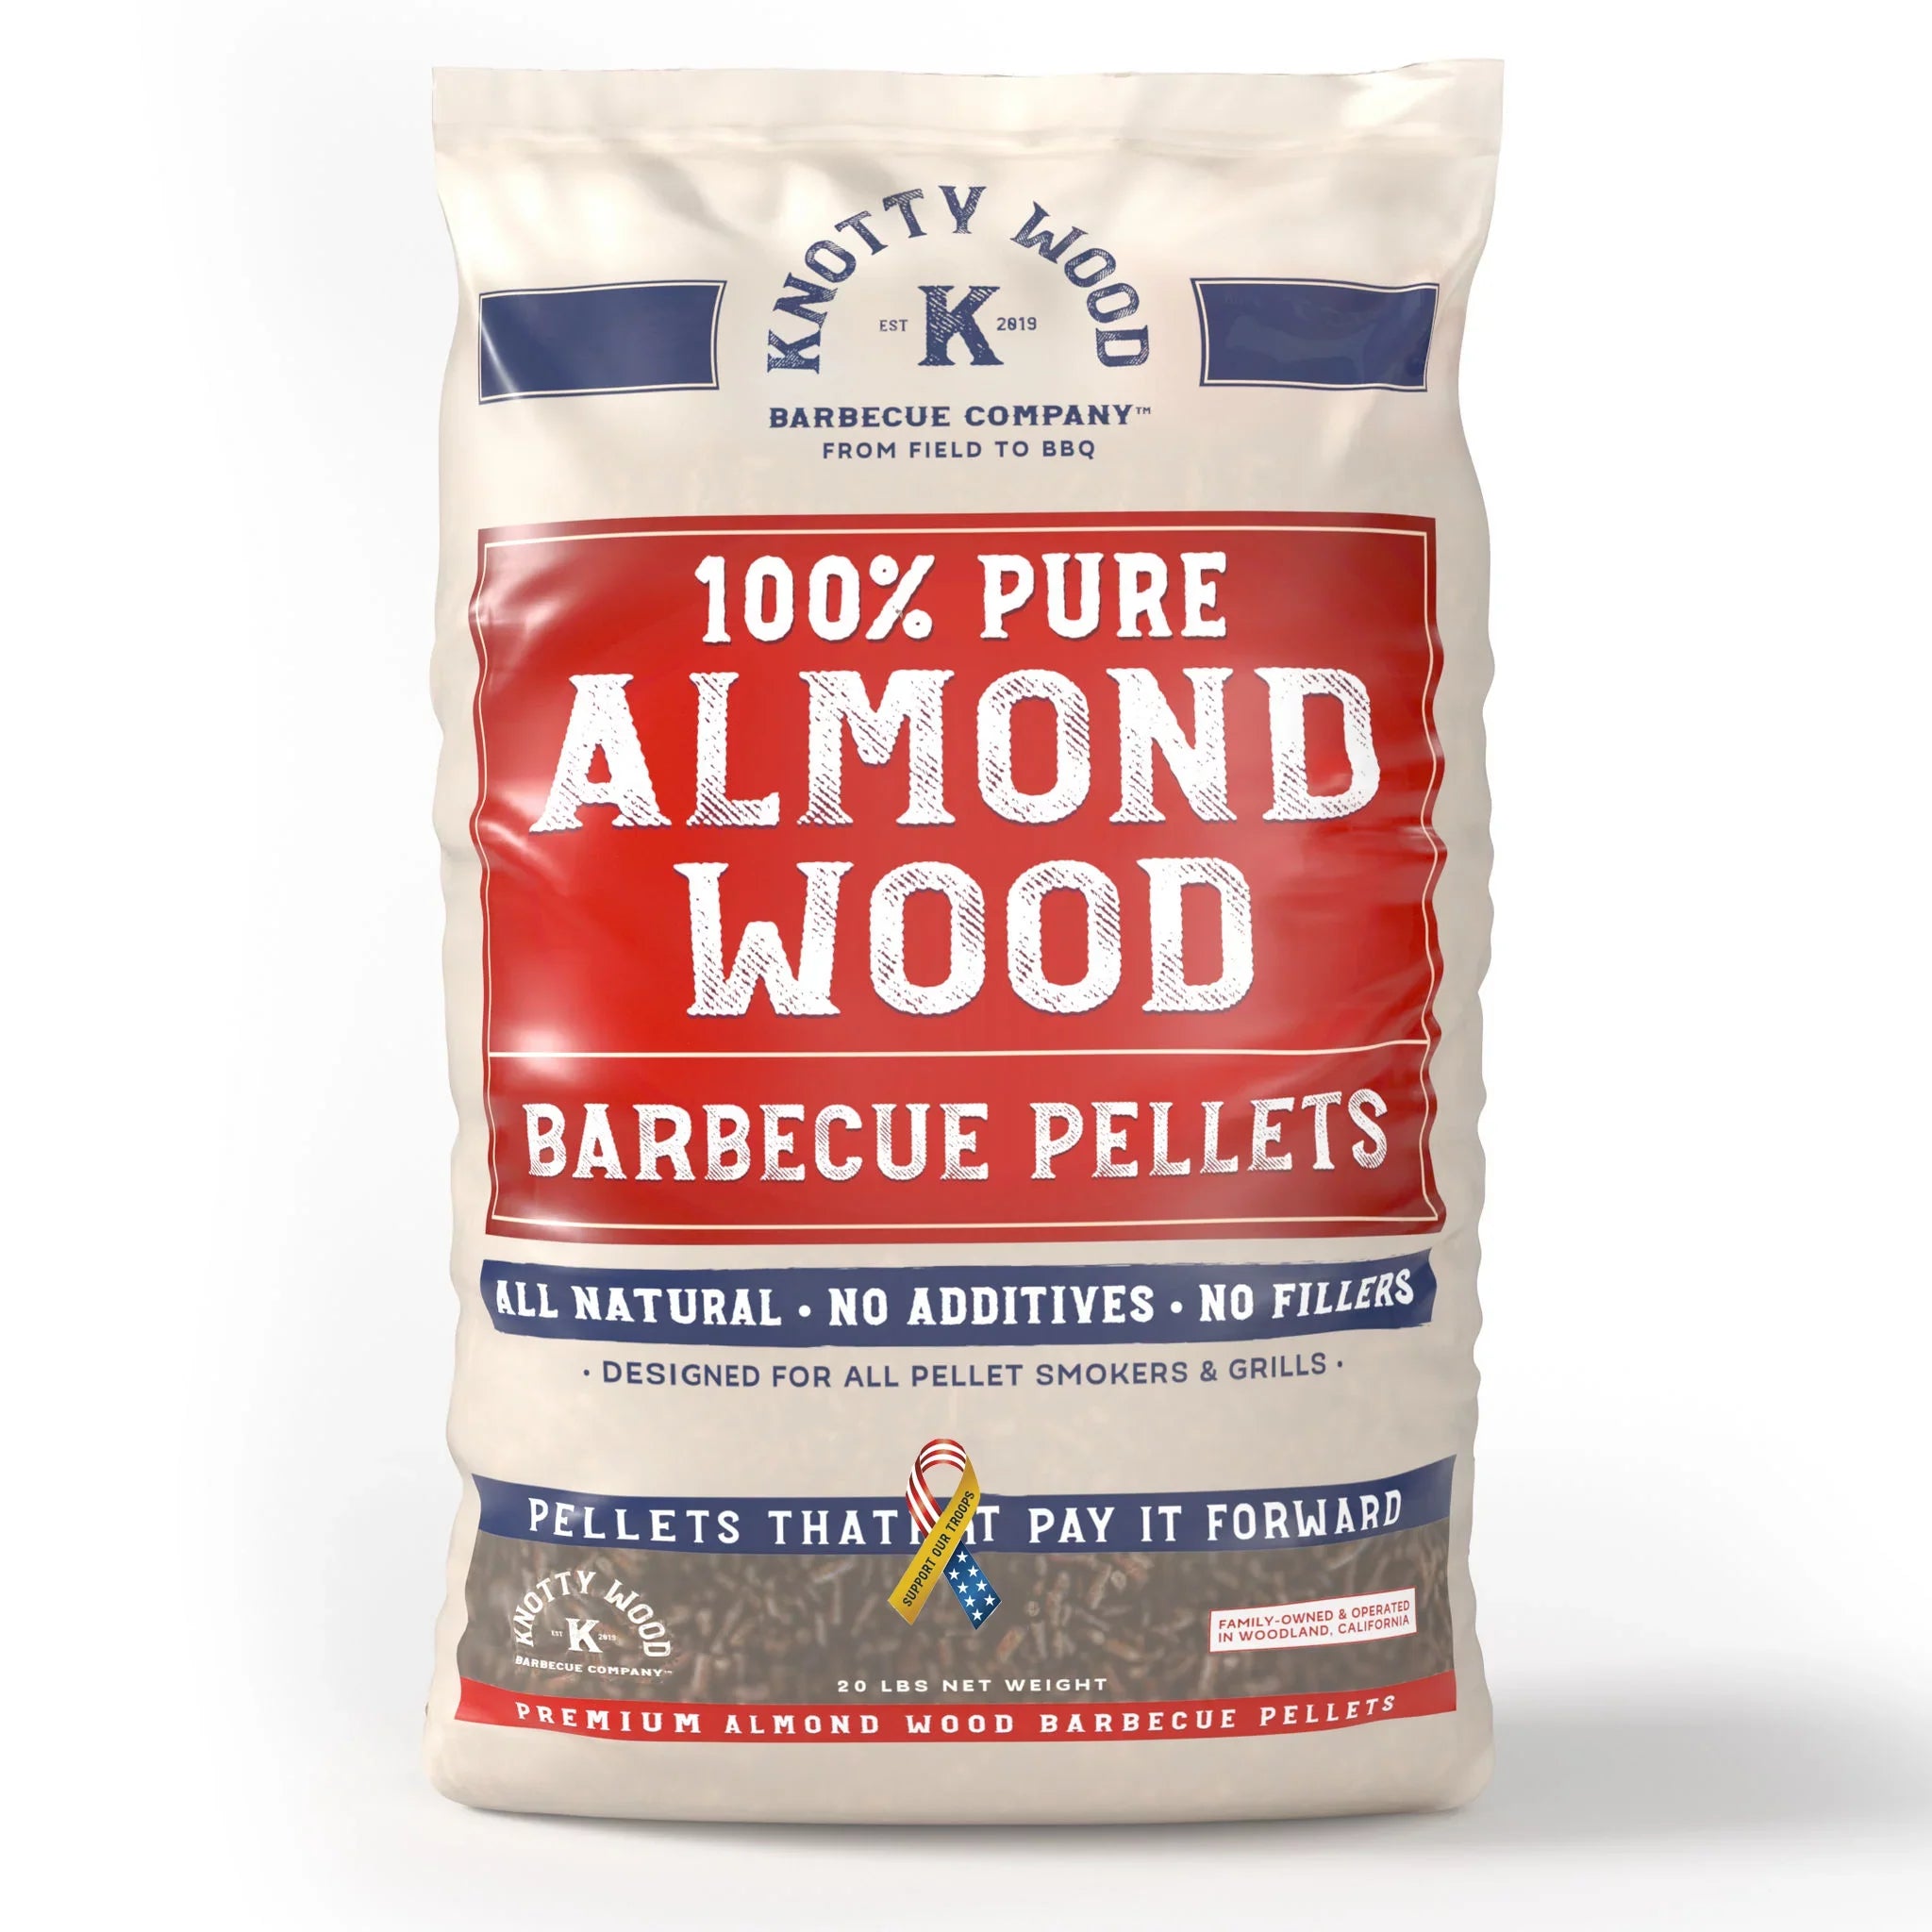 2 Pack: 100% Pure Almond Wood & Almond Cabernet Barbecue Pellets by Knotty Wood (2 x 20lb)